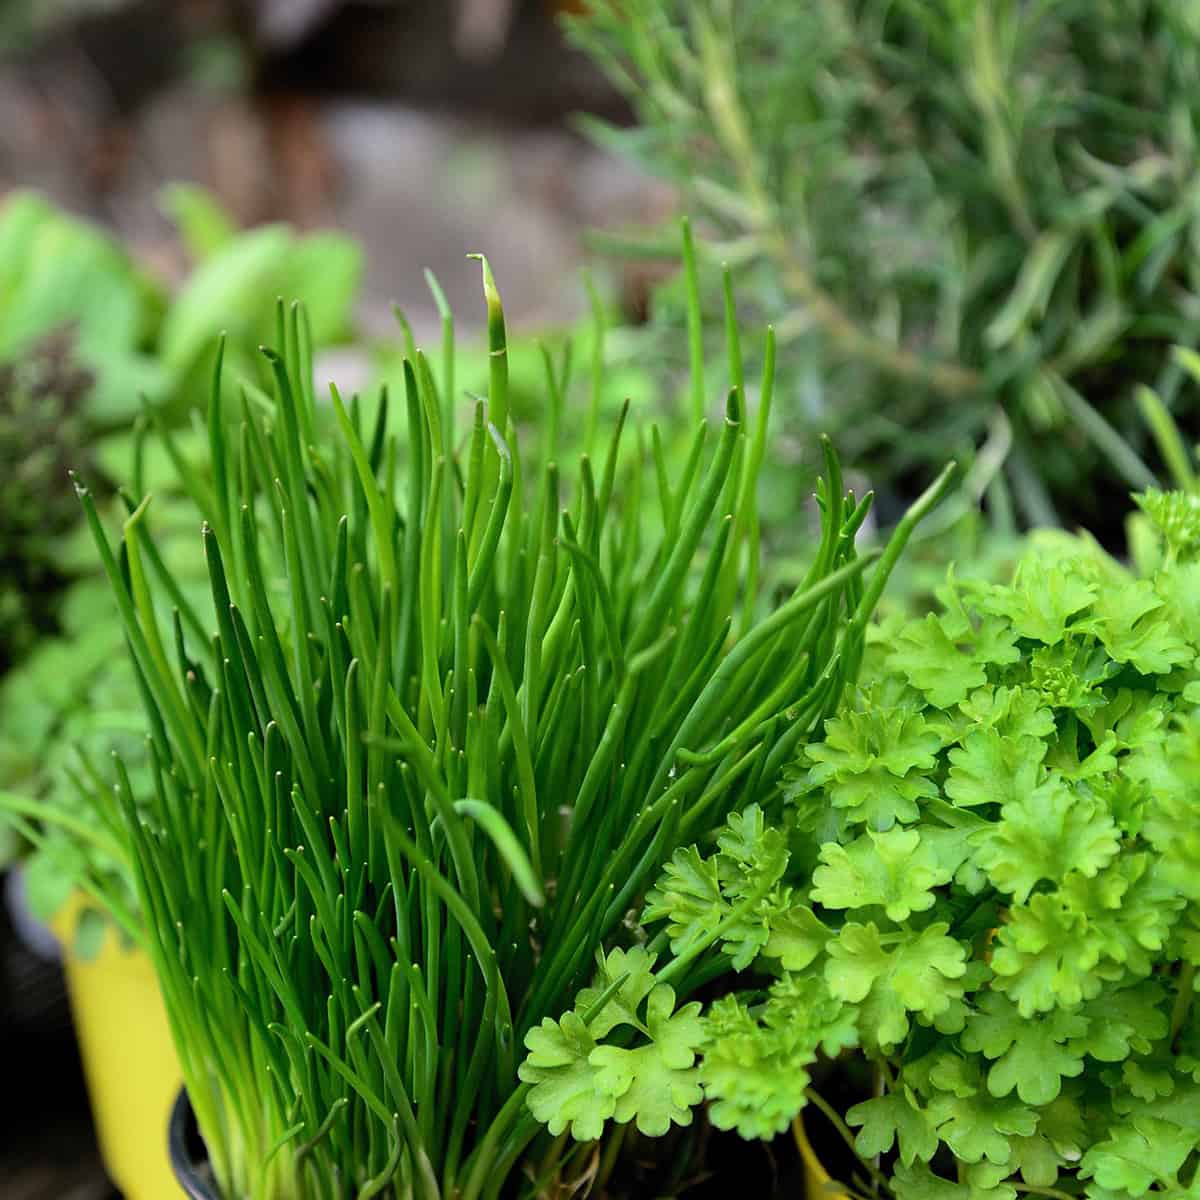 A bundle of chives, parsley, rosemary and other herbs